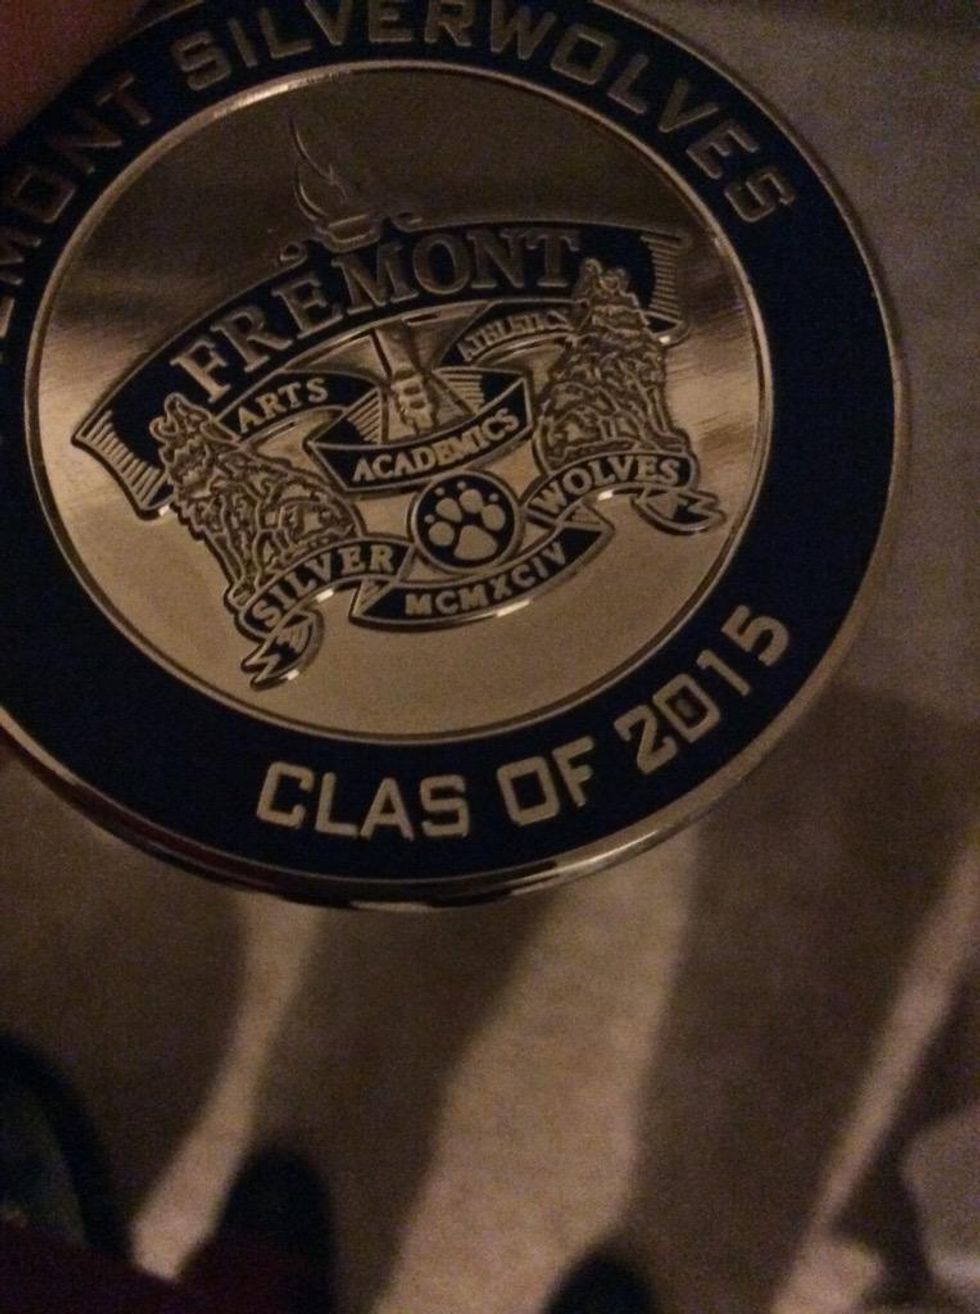 See If You Can Spot the Embarrassing Typo on This High School Graduation Medal